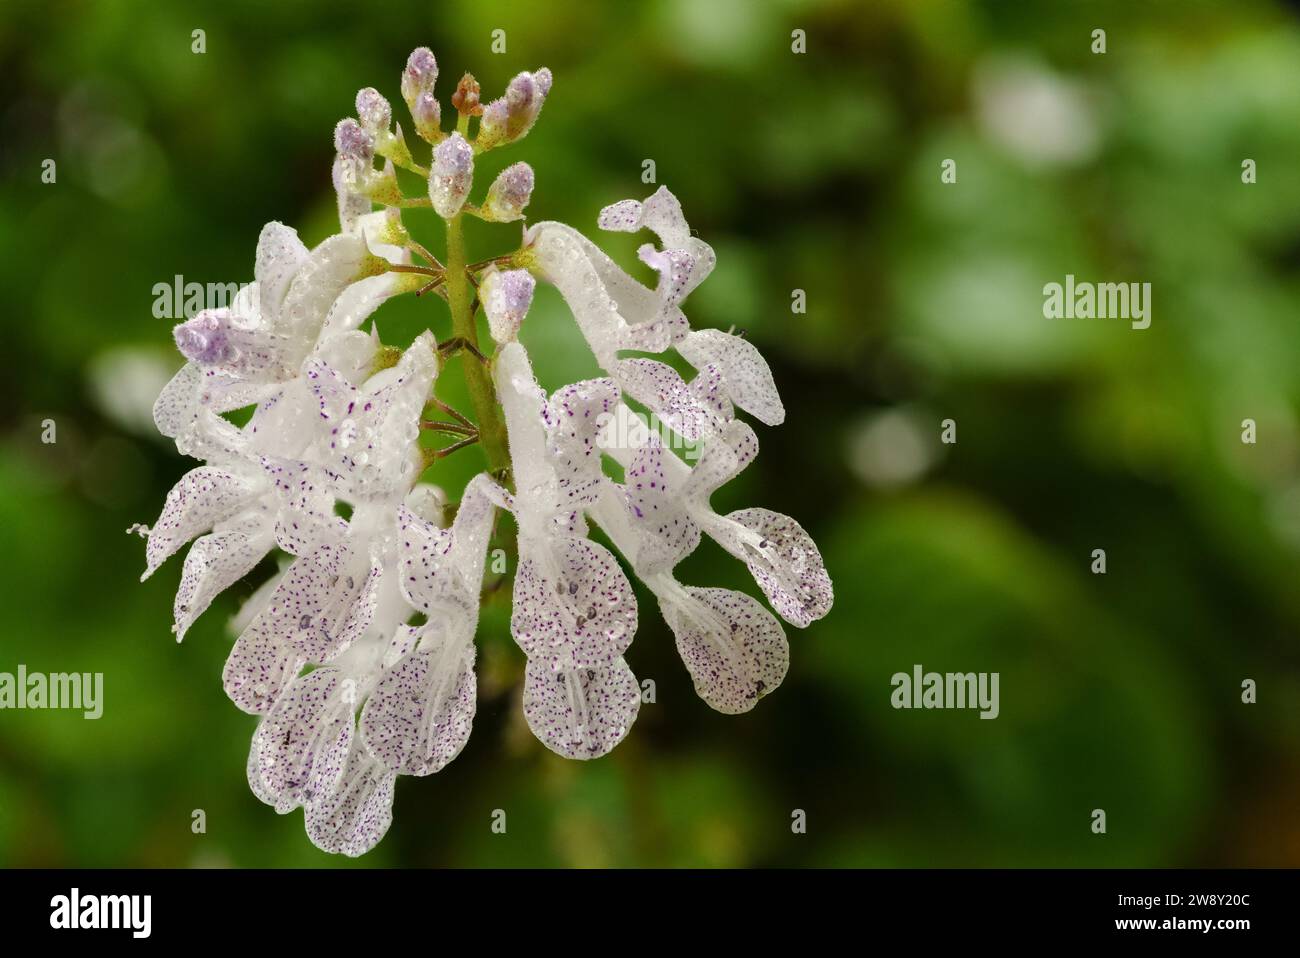 Close-up of a flower of the money plant (Plectranthus) verticillatus, with the background out of focus Stock Photo